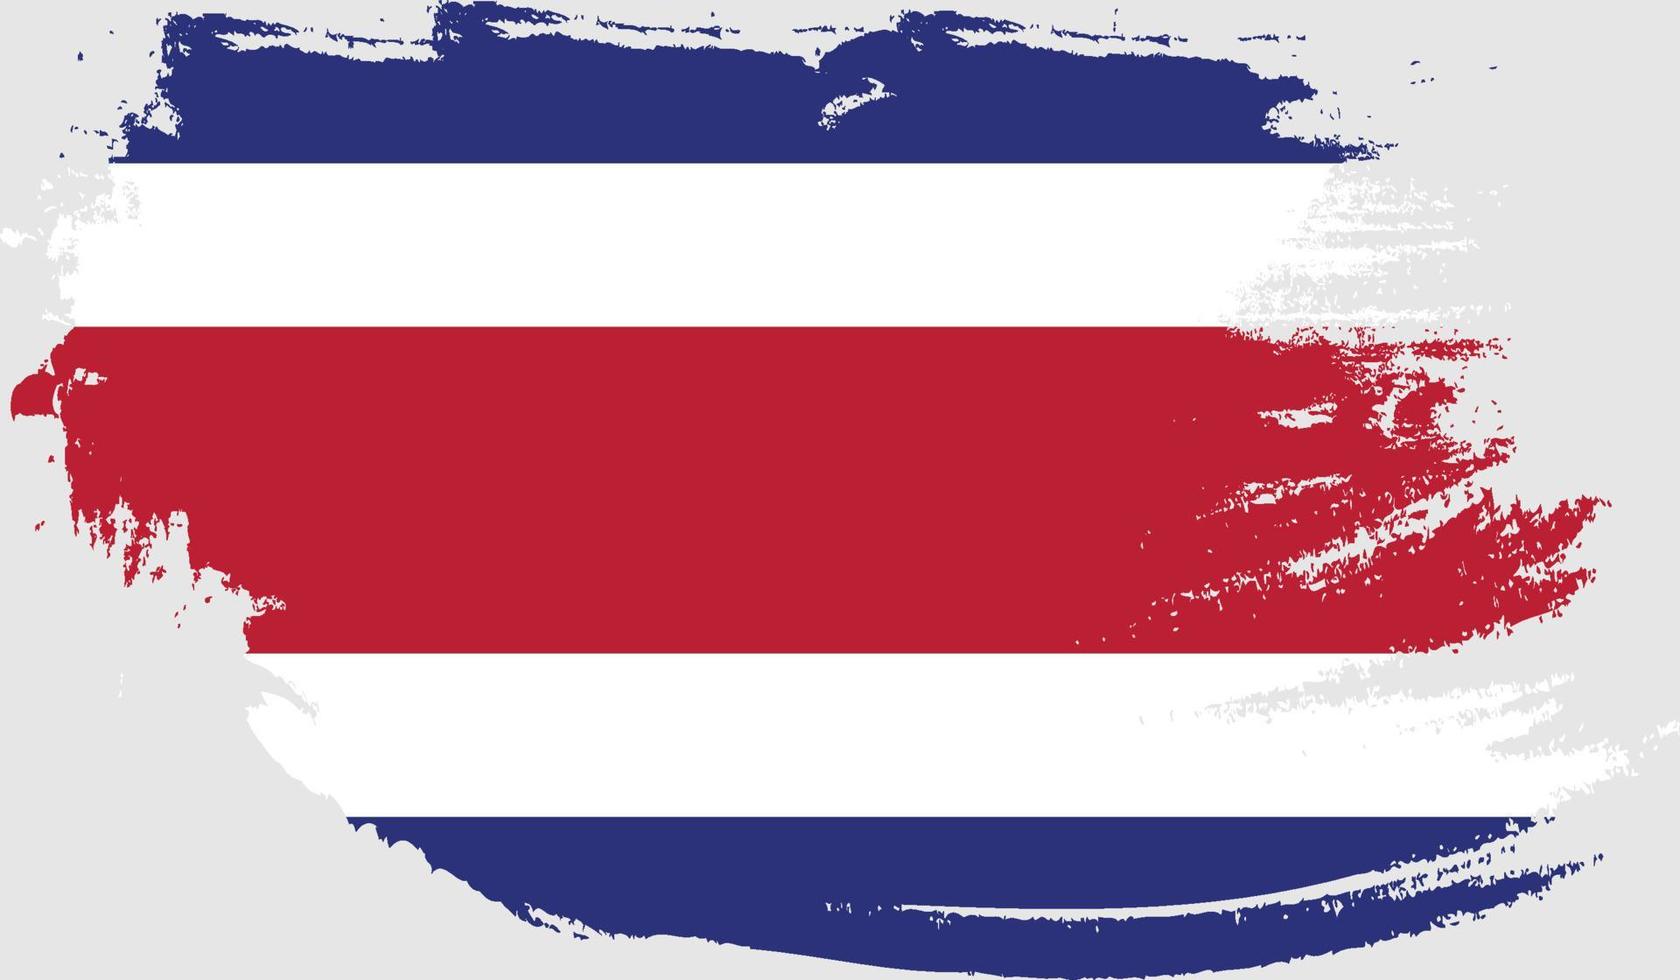 Costa Rica flag with grunge texture vector